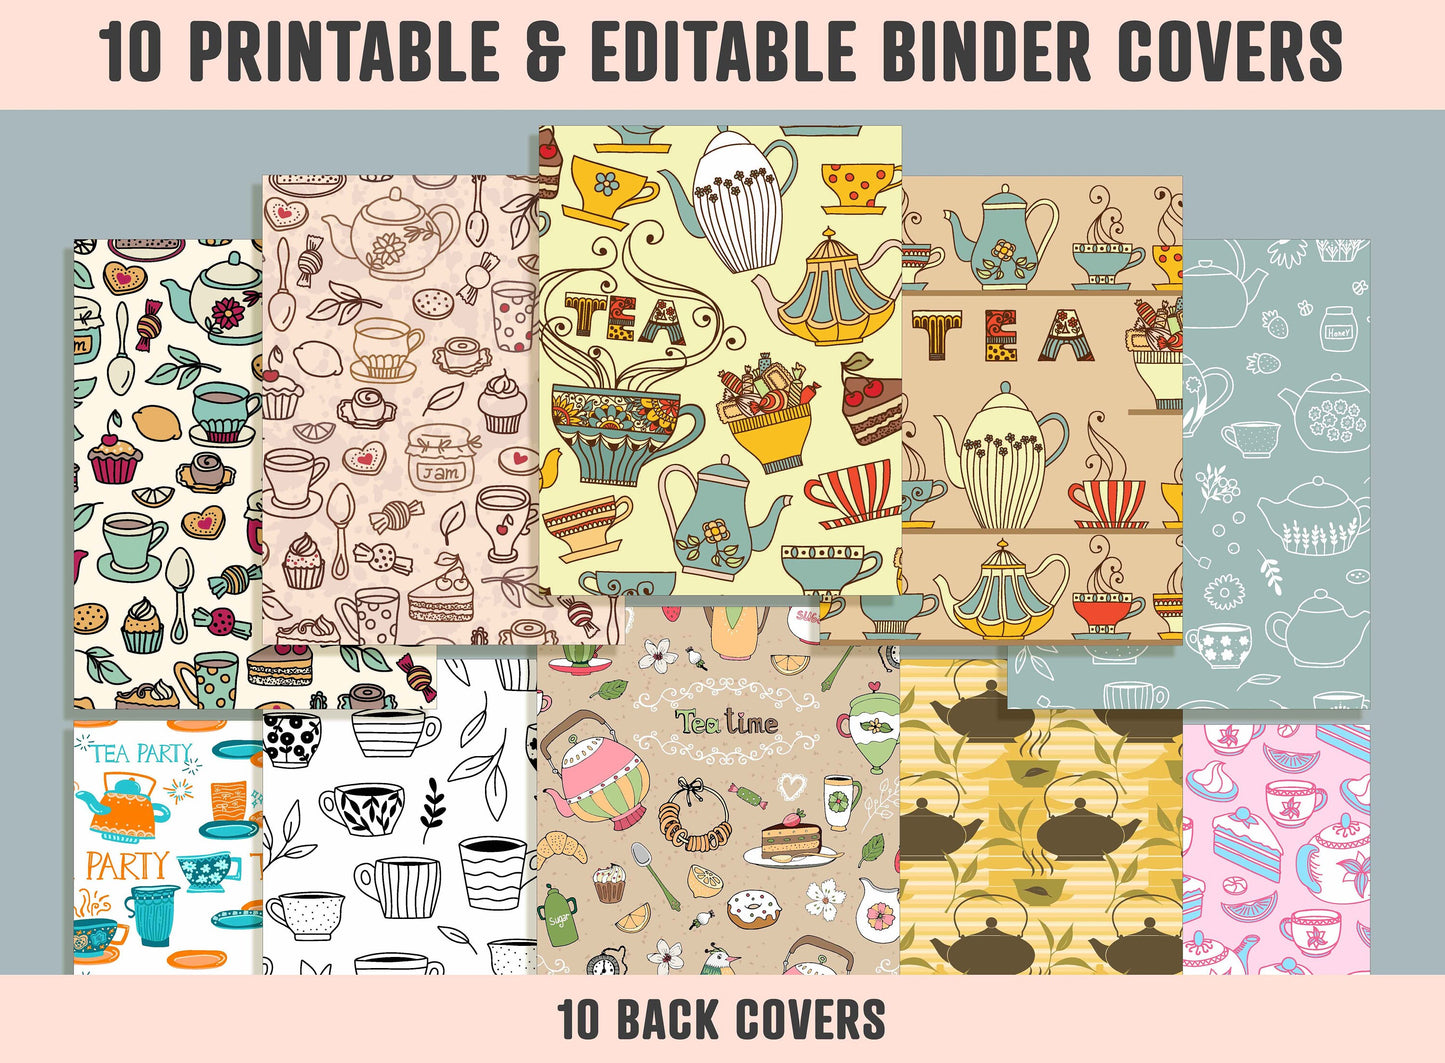 Cups and Teapots Binder Cover, 10 Printable & Editable Binder Covers + Spines, Binder Inserts, Teacher/School Planner Cover Template